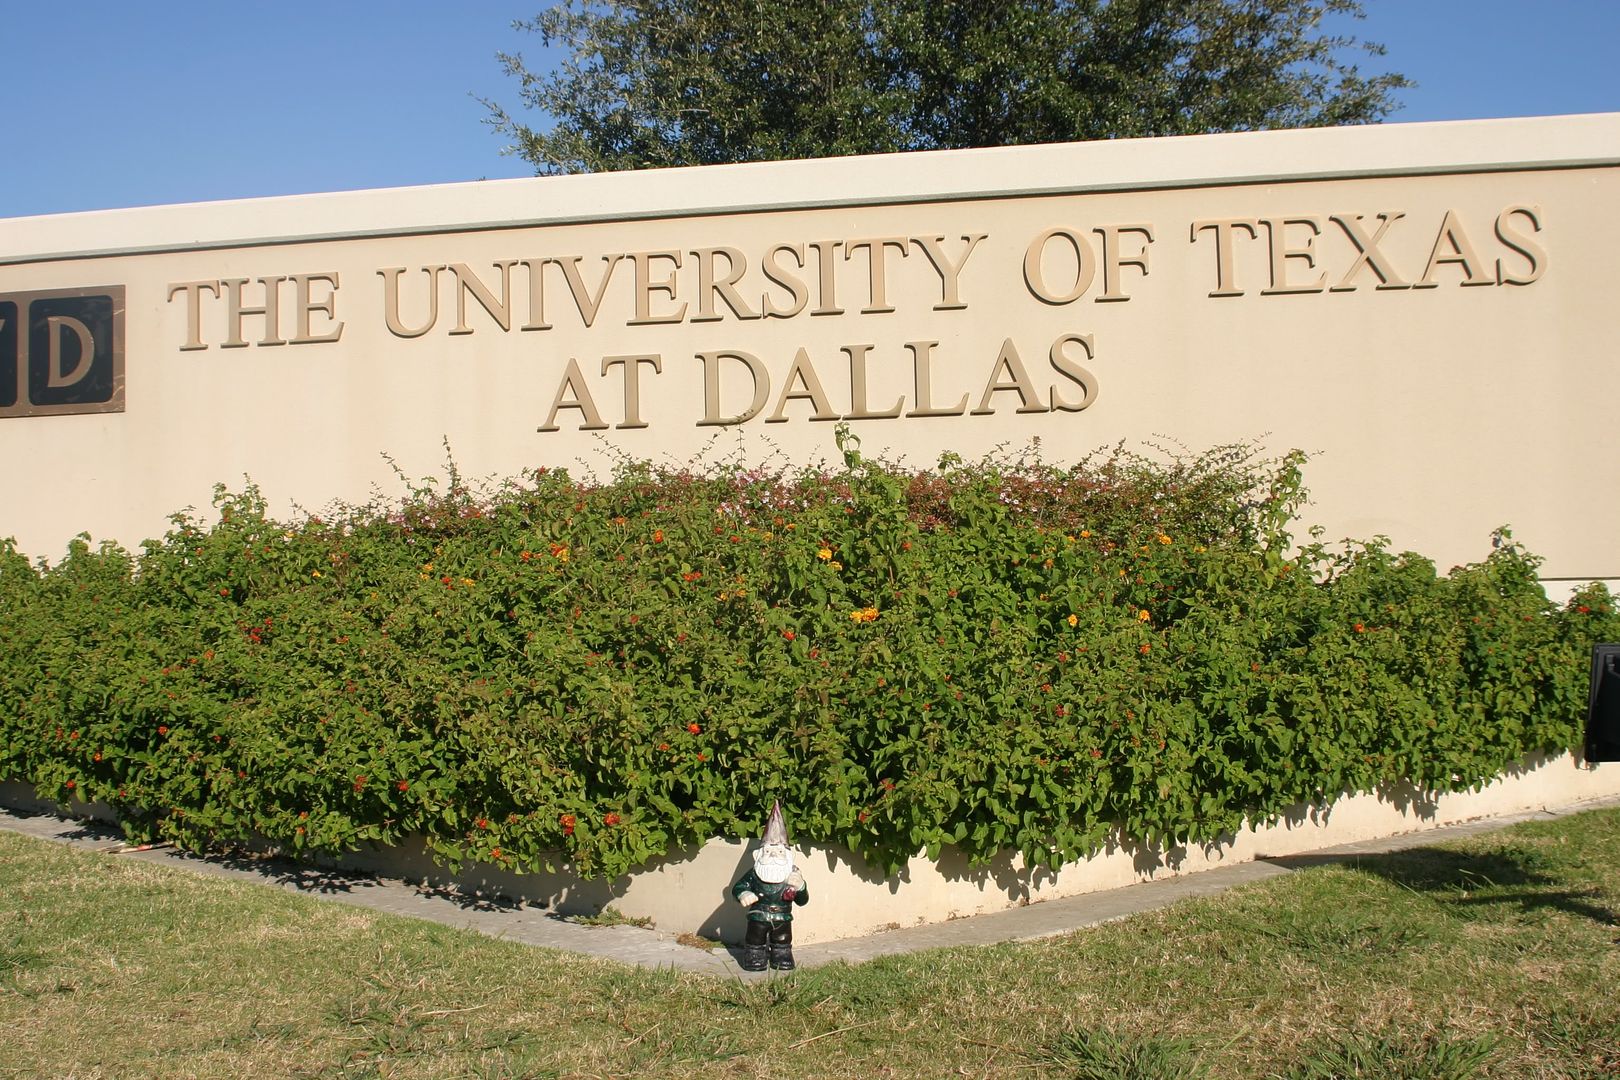 Attending the University of Texas at Dallas